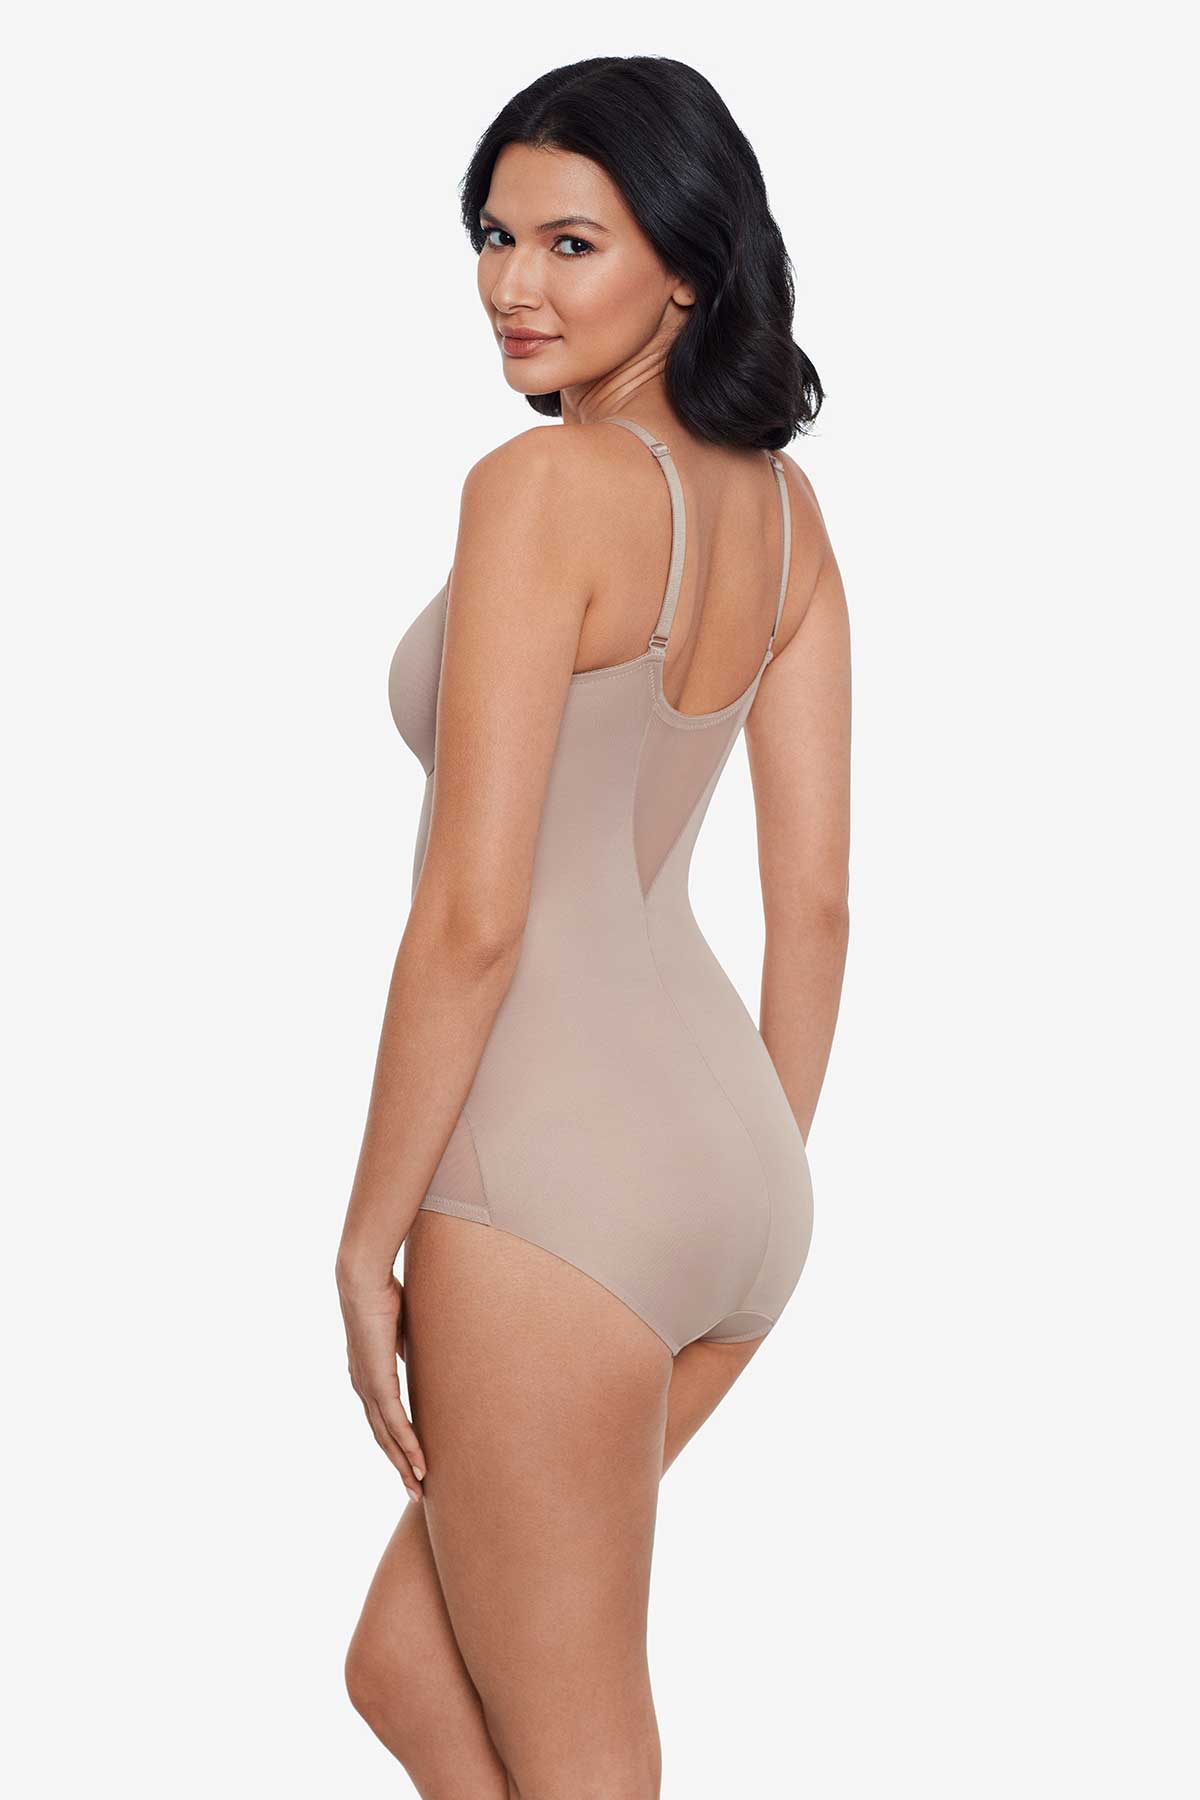 Miraclesuit Extra Firm Sexy Sheer Shaping Bodybriefer